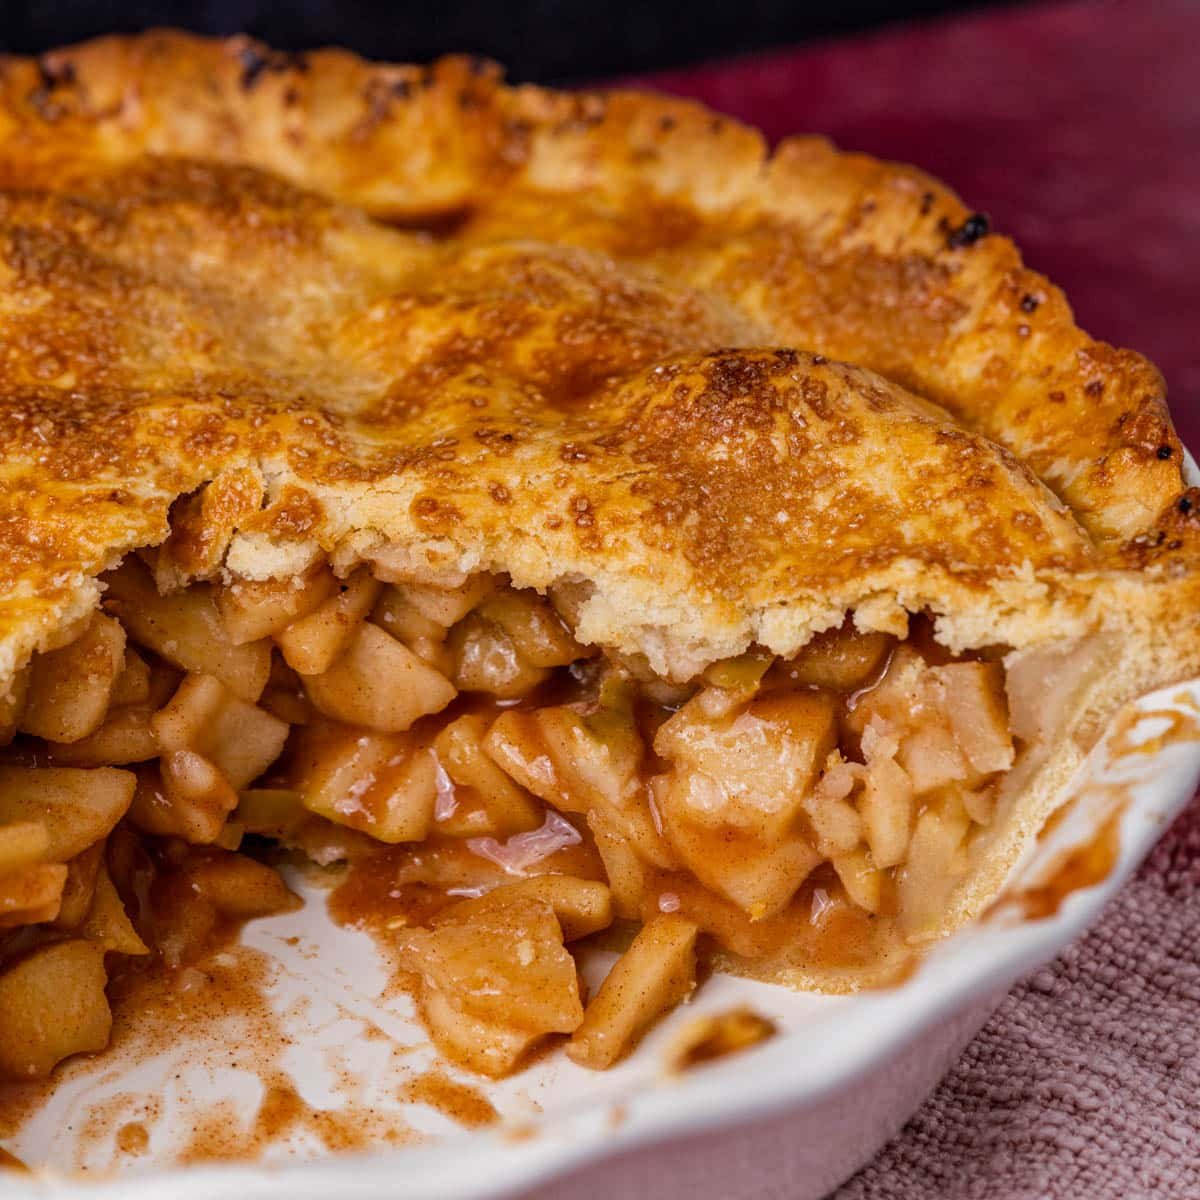 an apple pie in a pie dish with a golden brown crust